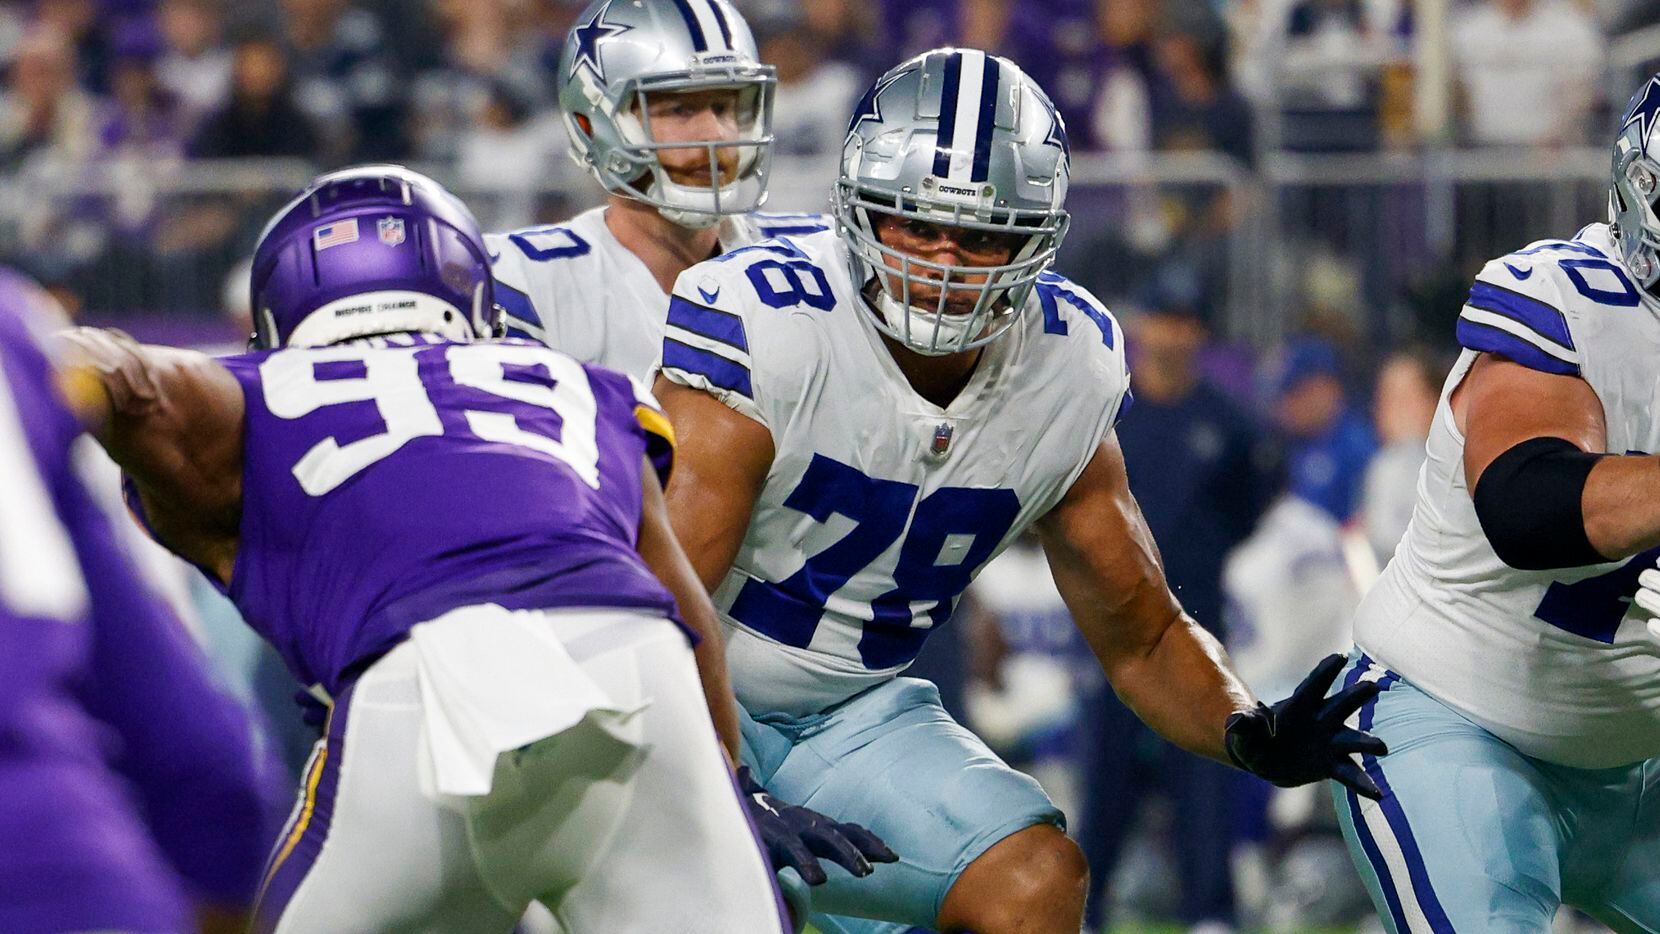 Dallas Cowboys offensive tackle Terence Steele (78) drops back to block during the first half an NFL football game against the Minnesota Vikings at U.S. Bank Stadium on Sunday, Oct. 31, 2021, in Minneapolis, Minnesota.